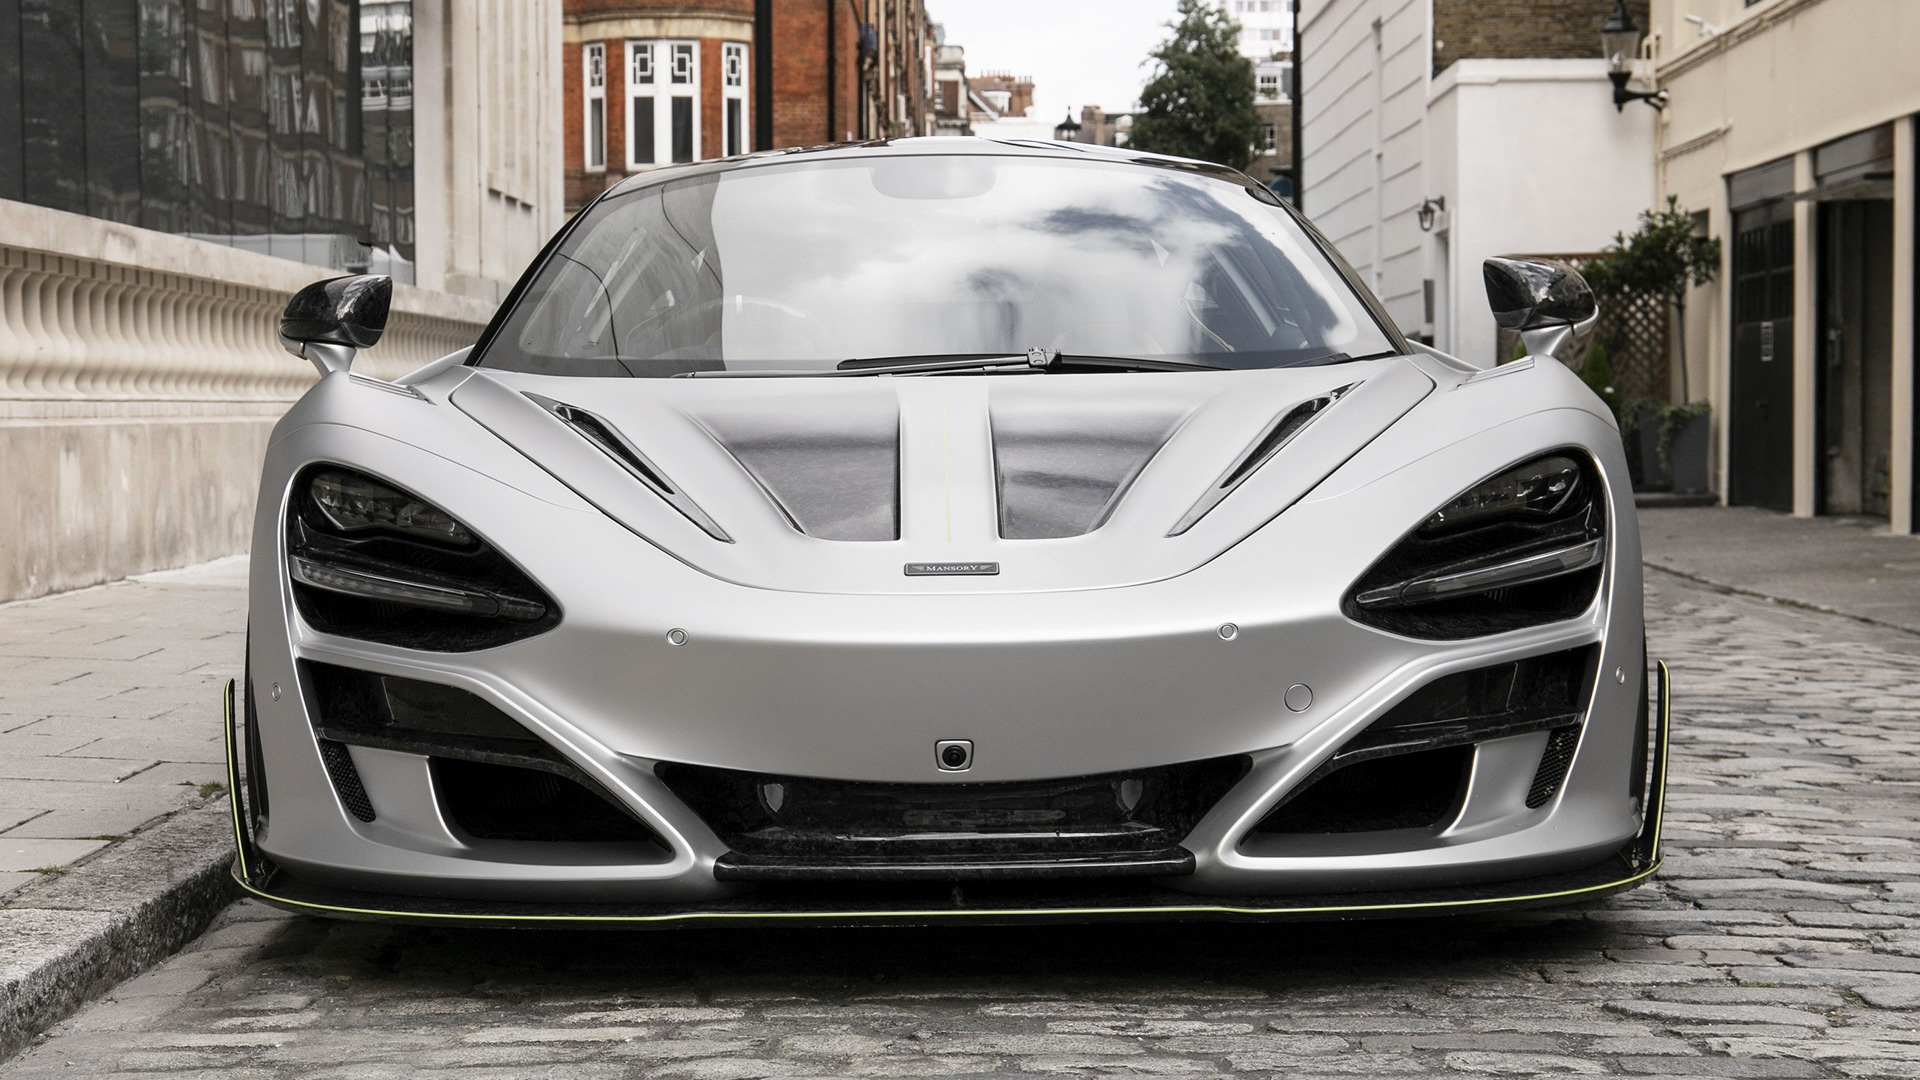 Car Mclaren 720s First Edition By Mansory Silver Car Sport Car Supercar Tuning 1920x1080